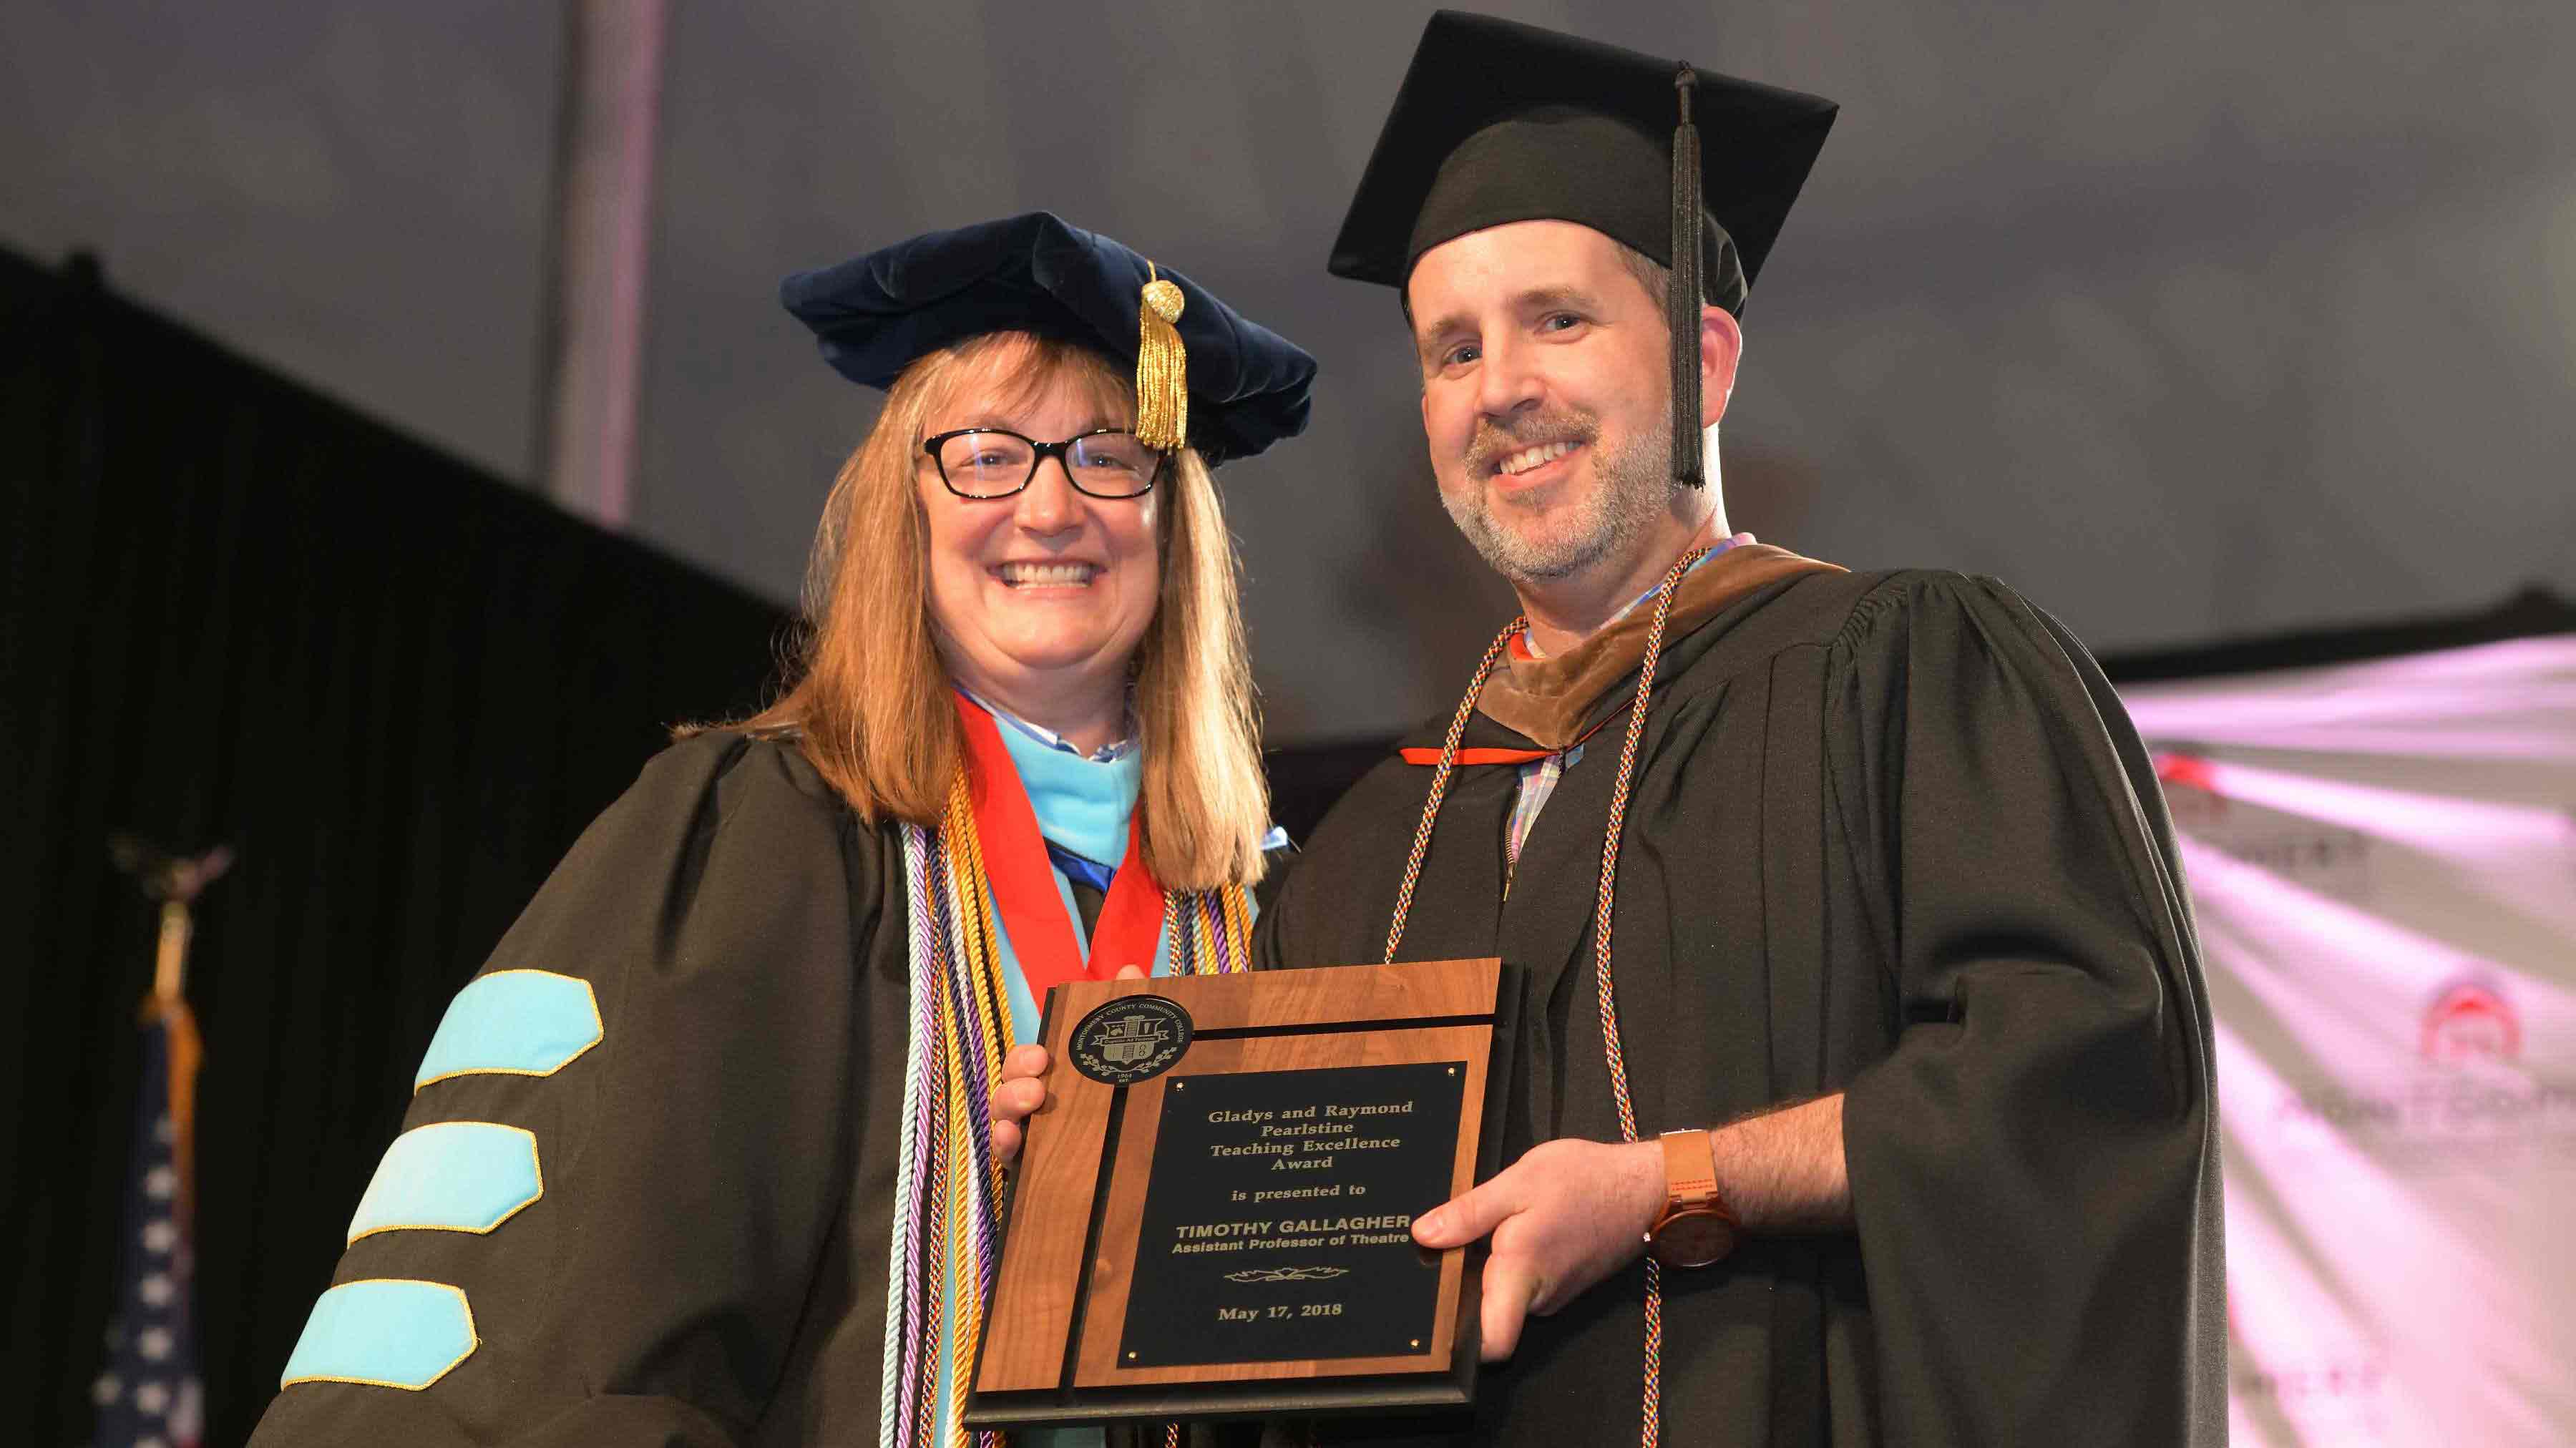 Assistant Professor of Theatre Arts Tim Gallagher received the 2018 Pearlstine Excellence in Teaching Award from Vice President of Academic Affairs and Provost Victoria Bastecki-Perez. Photo by David DeBalko